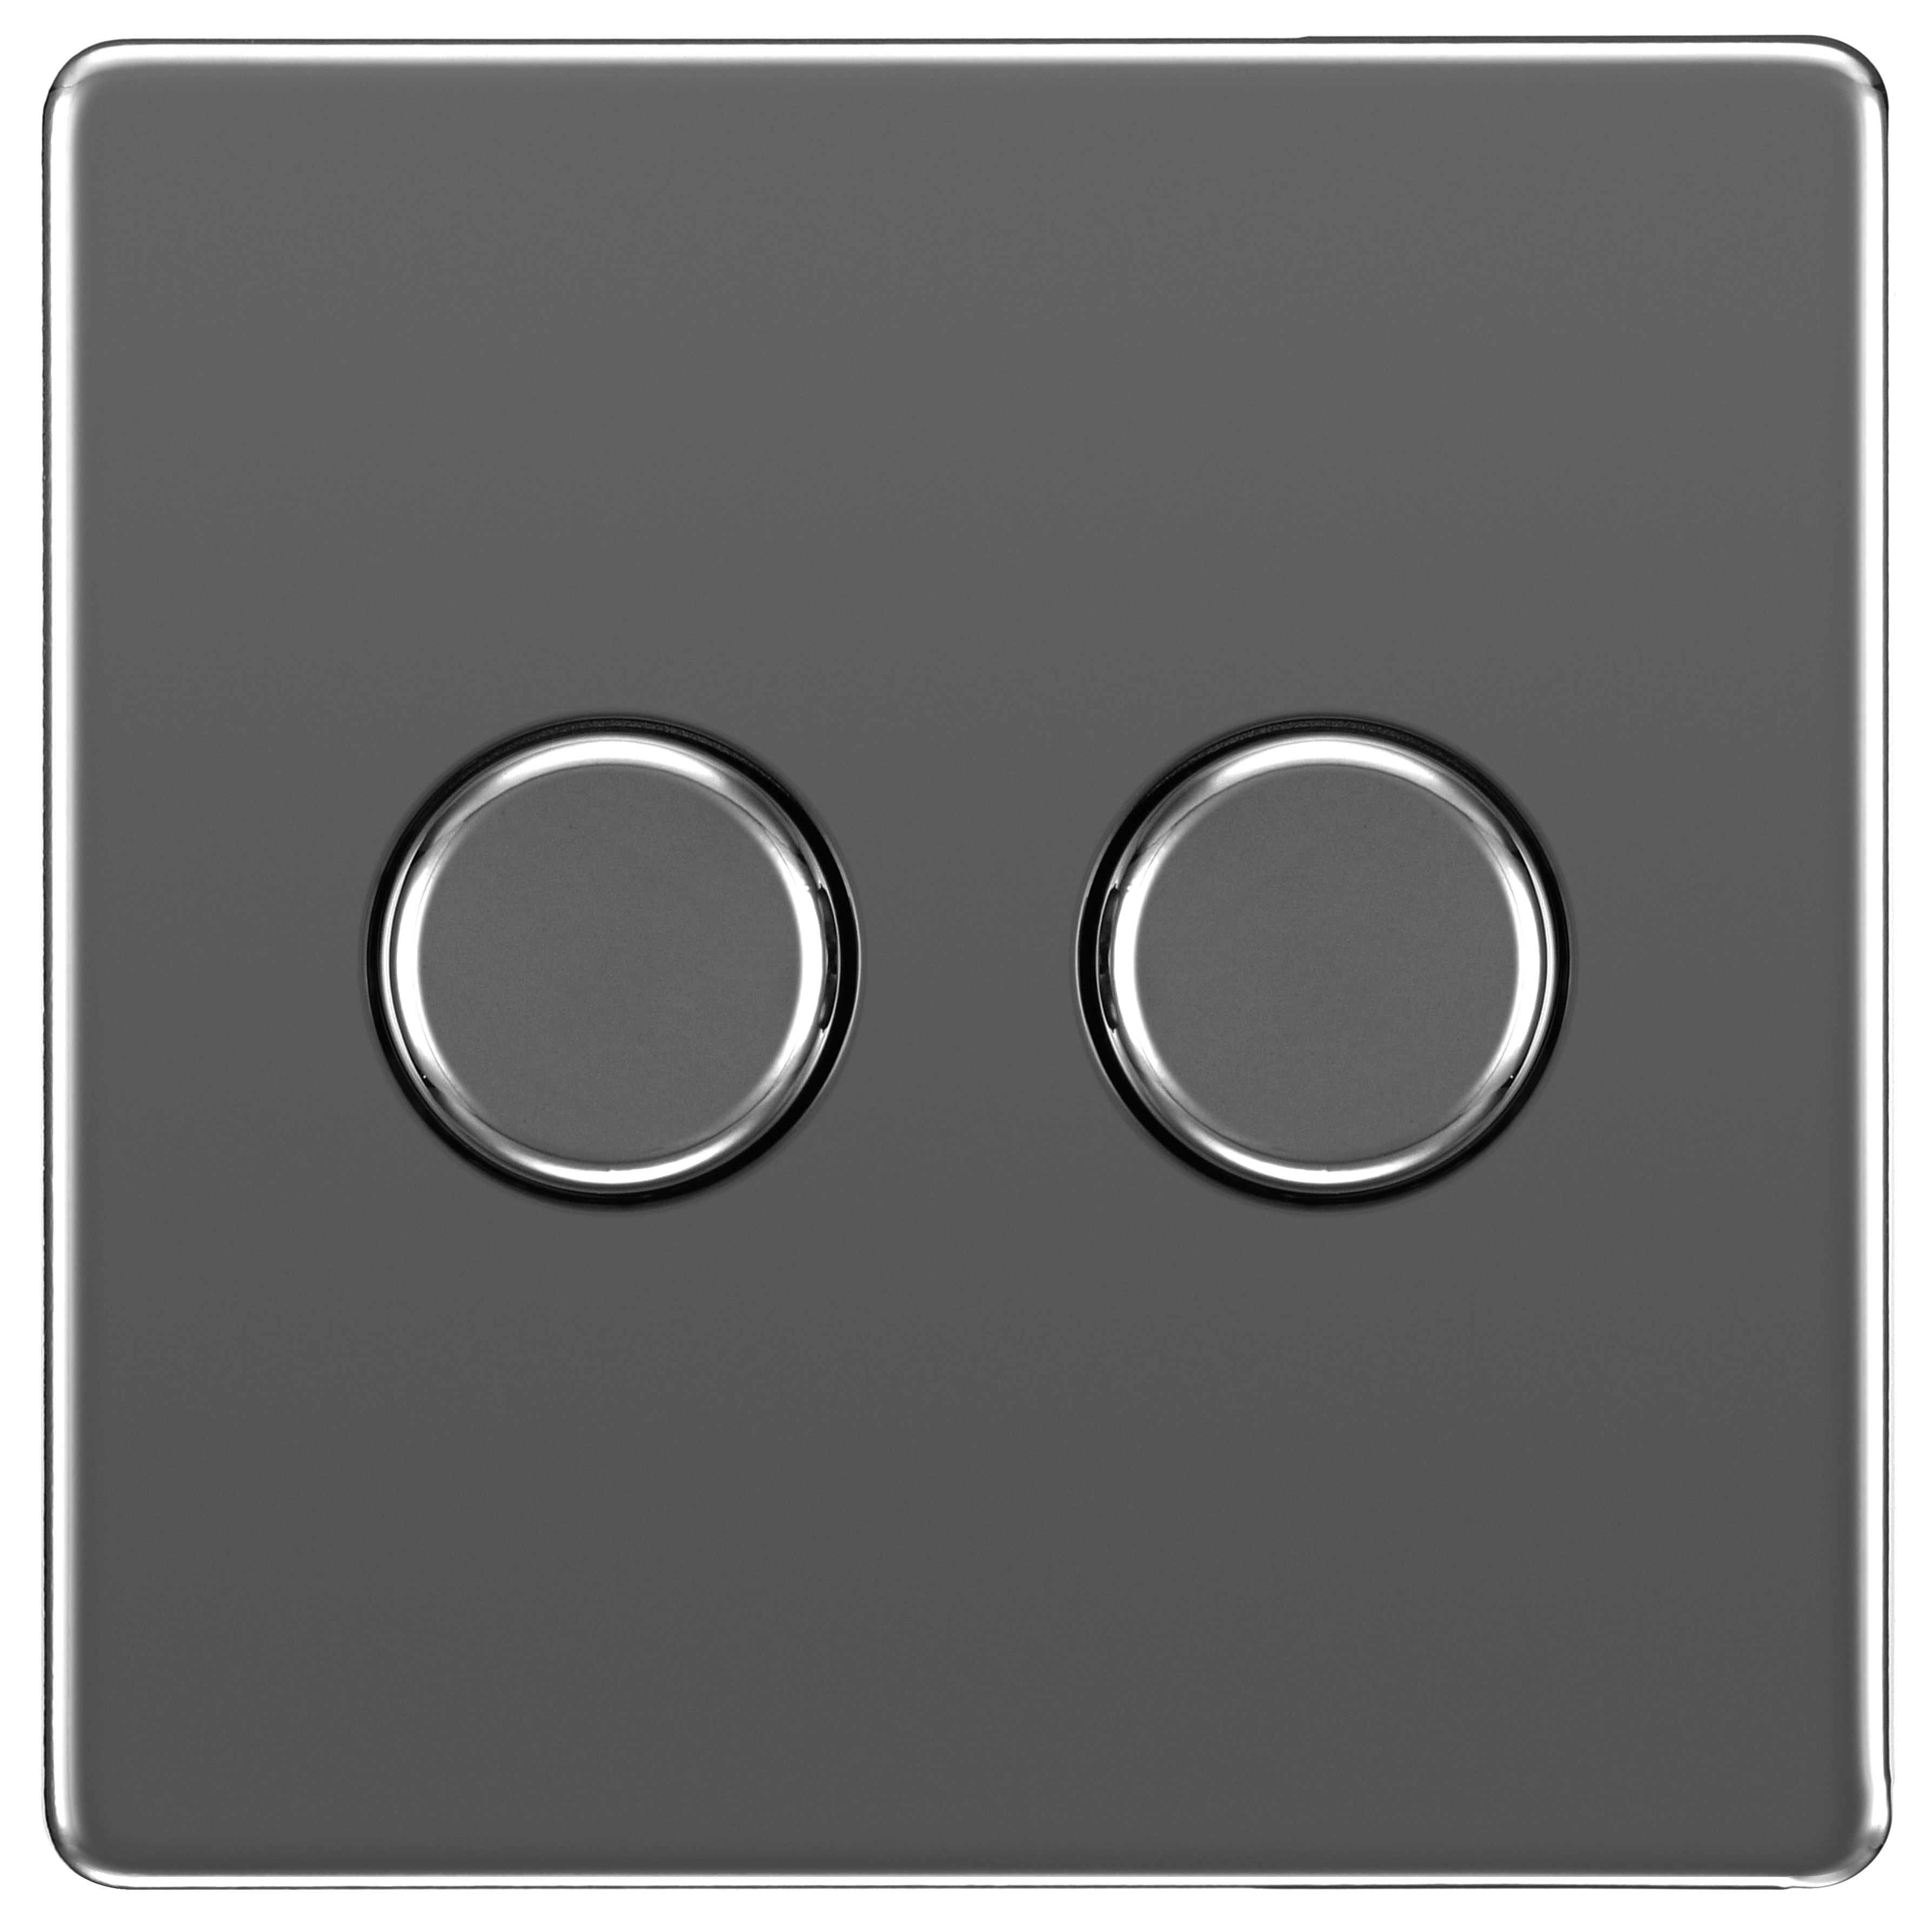 Image of BG 400W Screwless Flat Plate Double Dimmer Switch, 2-Way Push On/Off - Black Nickel